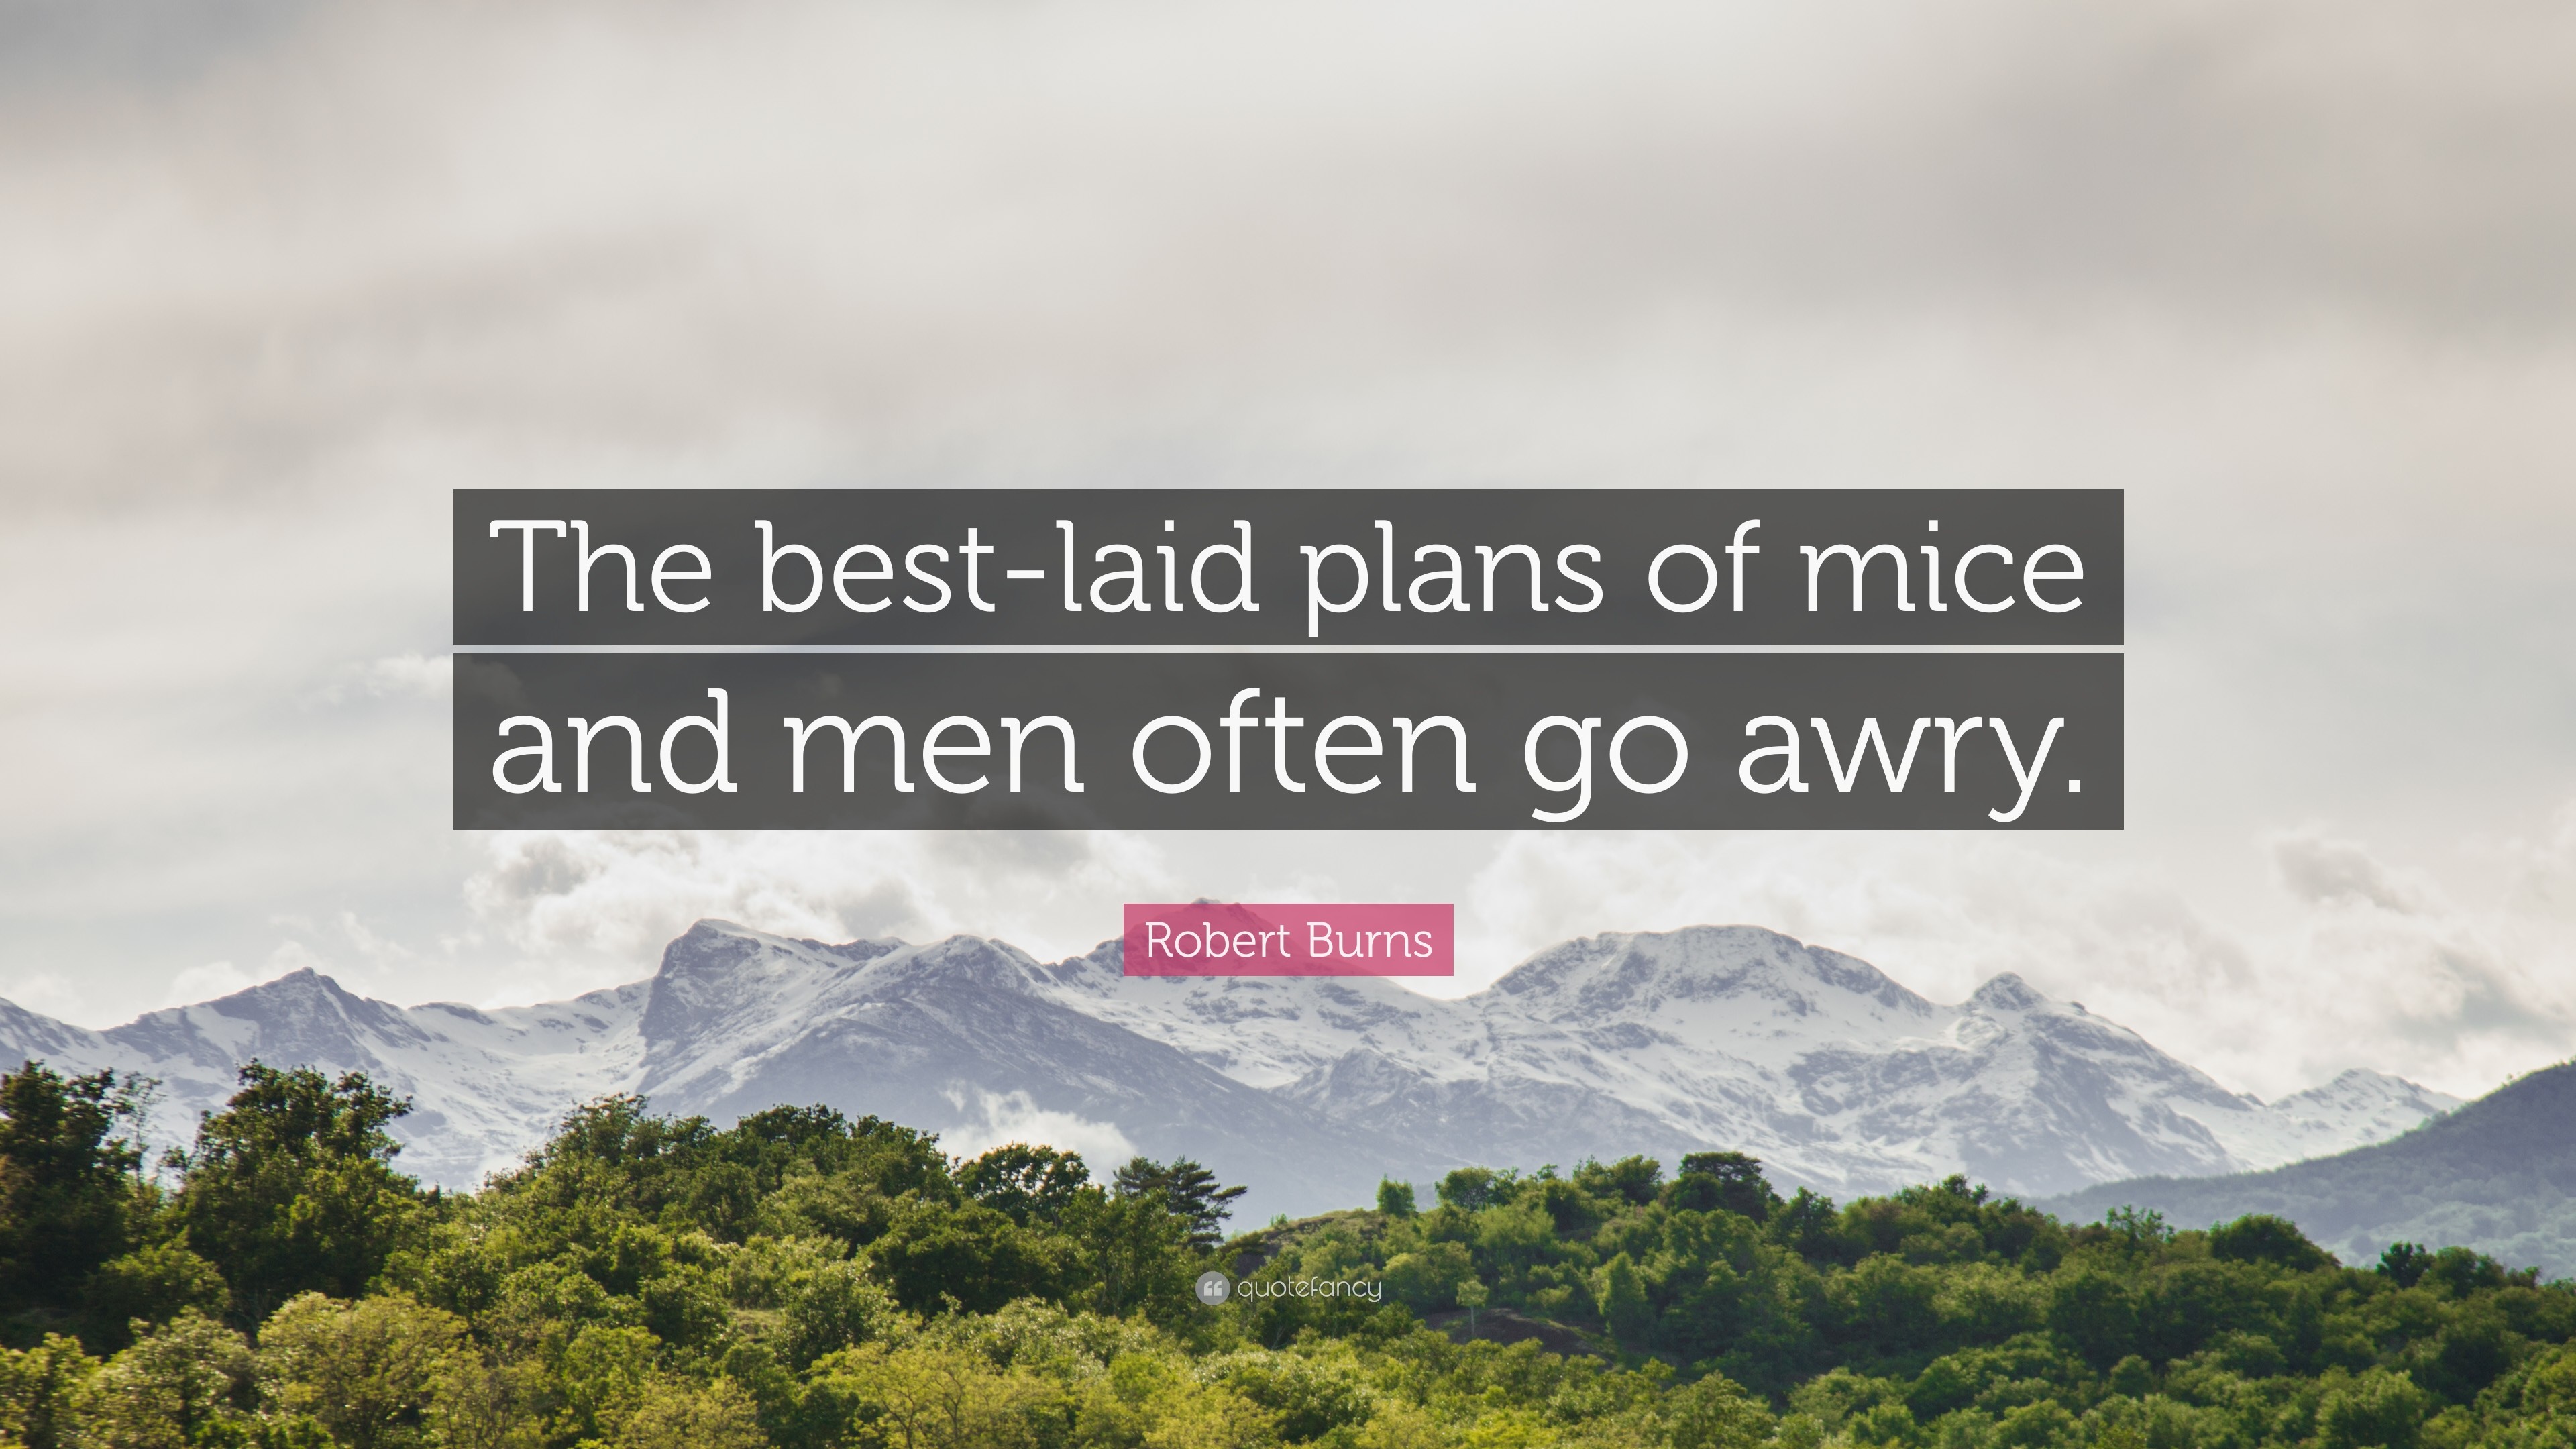 3840x2160 Robert Burns Quote: “The best-laid plans of mice and men often go